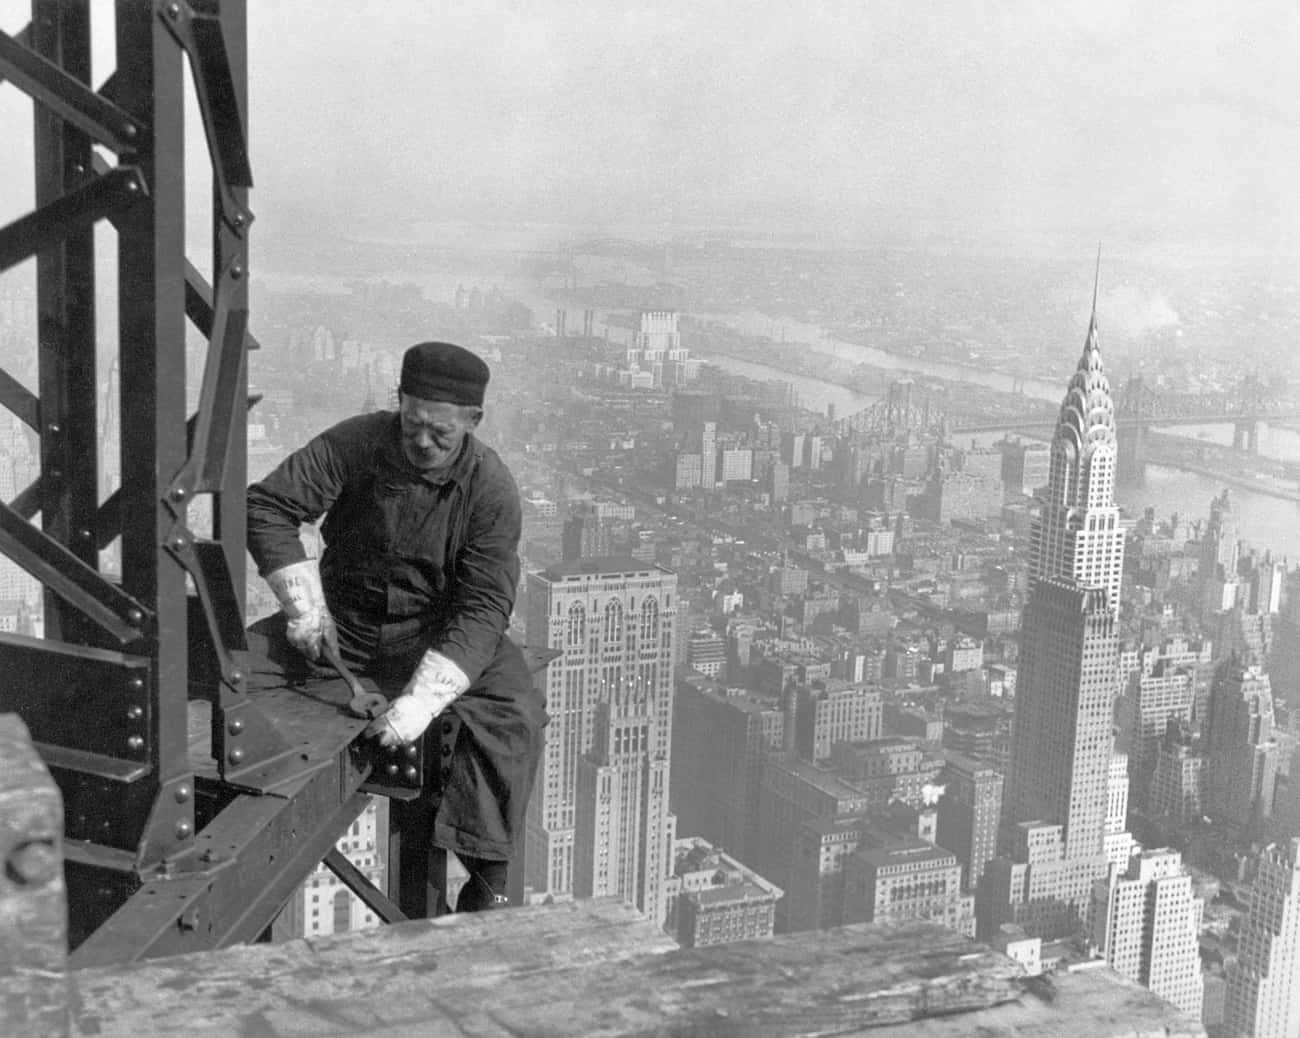 In 1929, Investors Announced The Height Of The Empire State Building Would Be Increased By 200 Feet